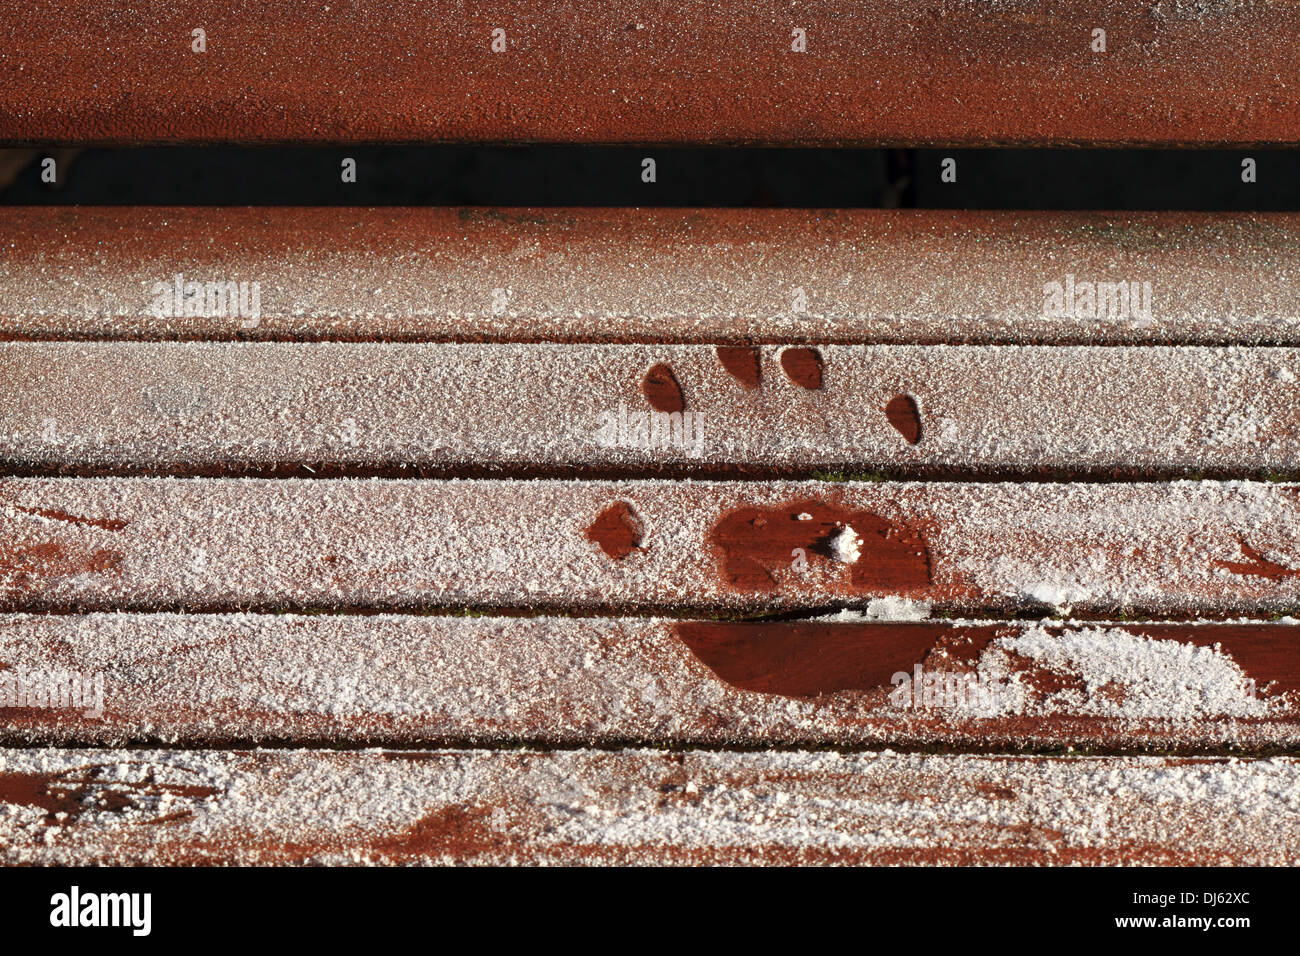 A small child hand print on a frosty icy park bench. Stock Photo